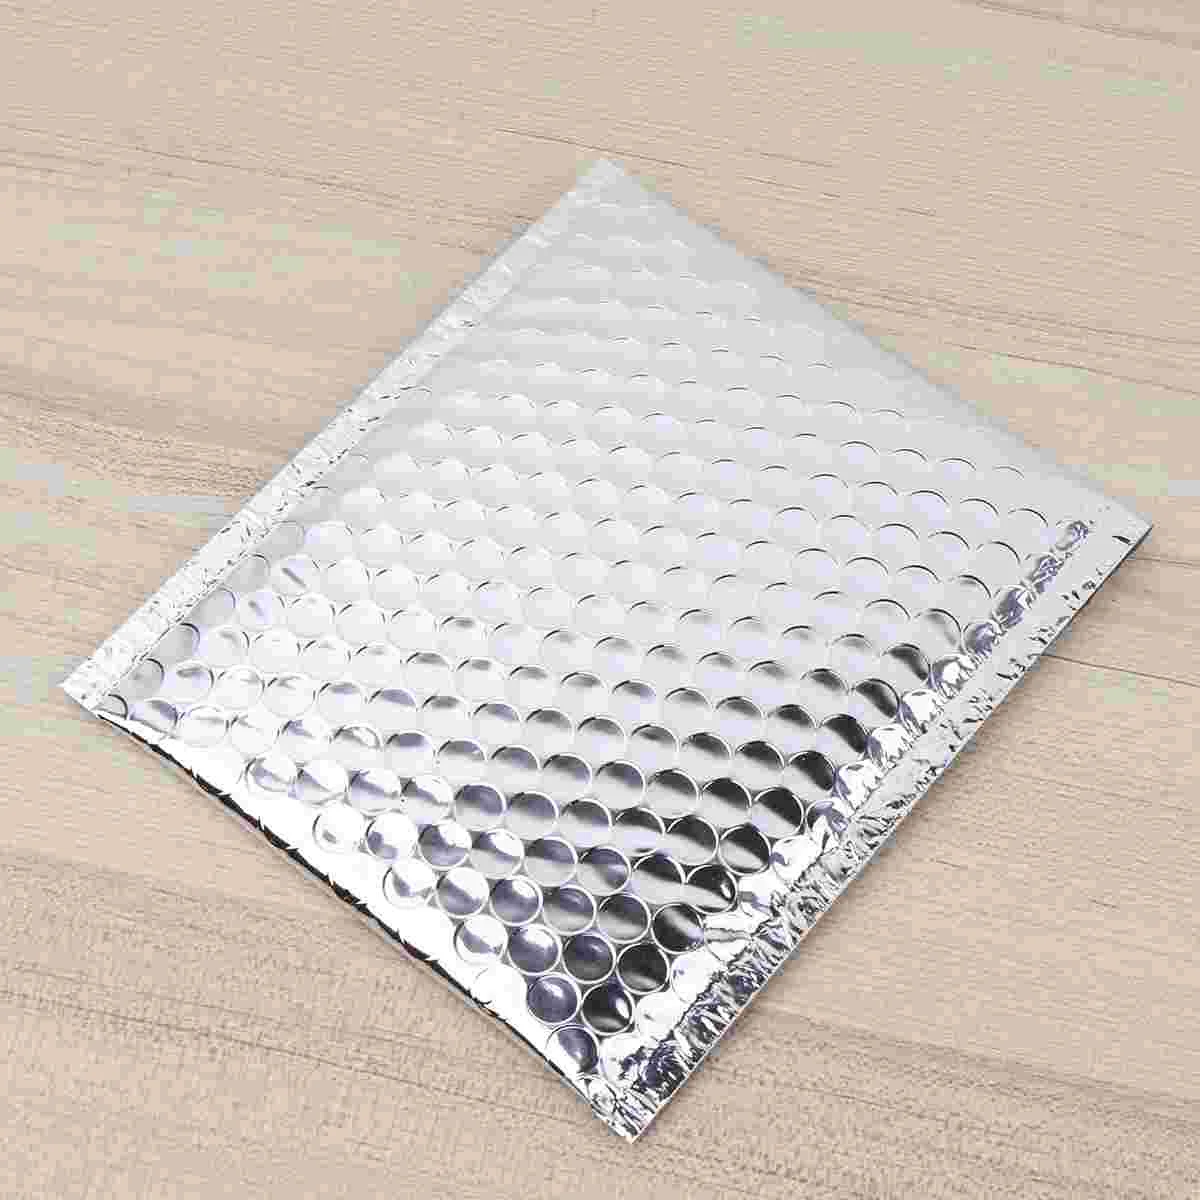 28 Pcs Bubble Bag Shockproof Packaging Metal Small Envelope Waterproof Logistic Express of gift packaging bubble film packing bubble pad shockproof bubble mat cushioning wrap express packaging for packing